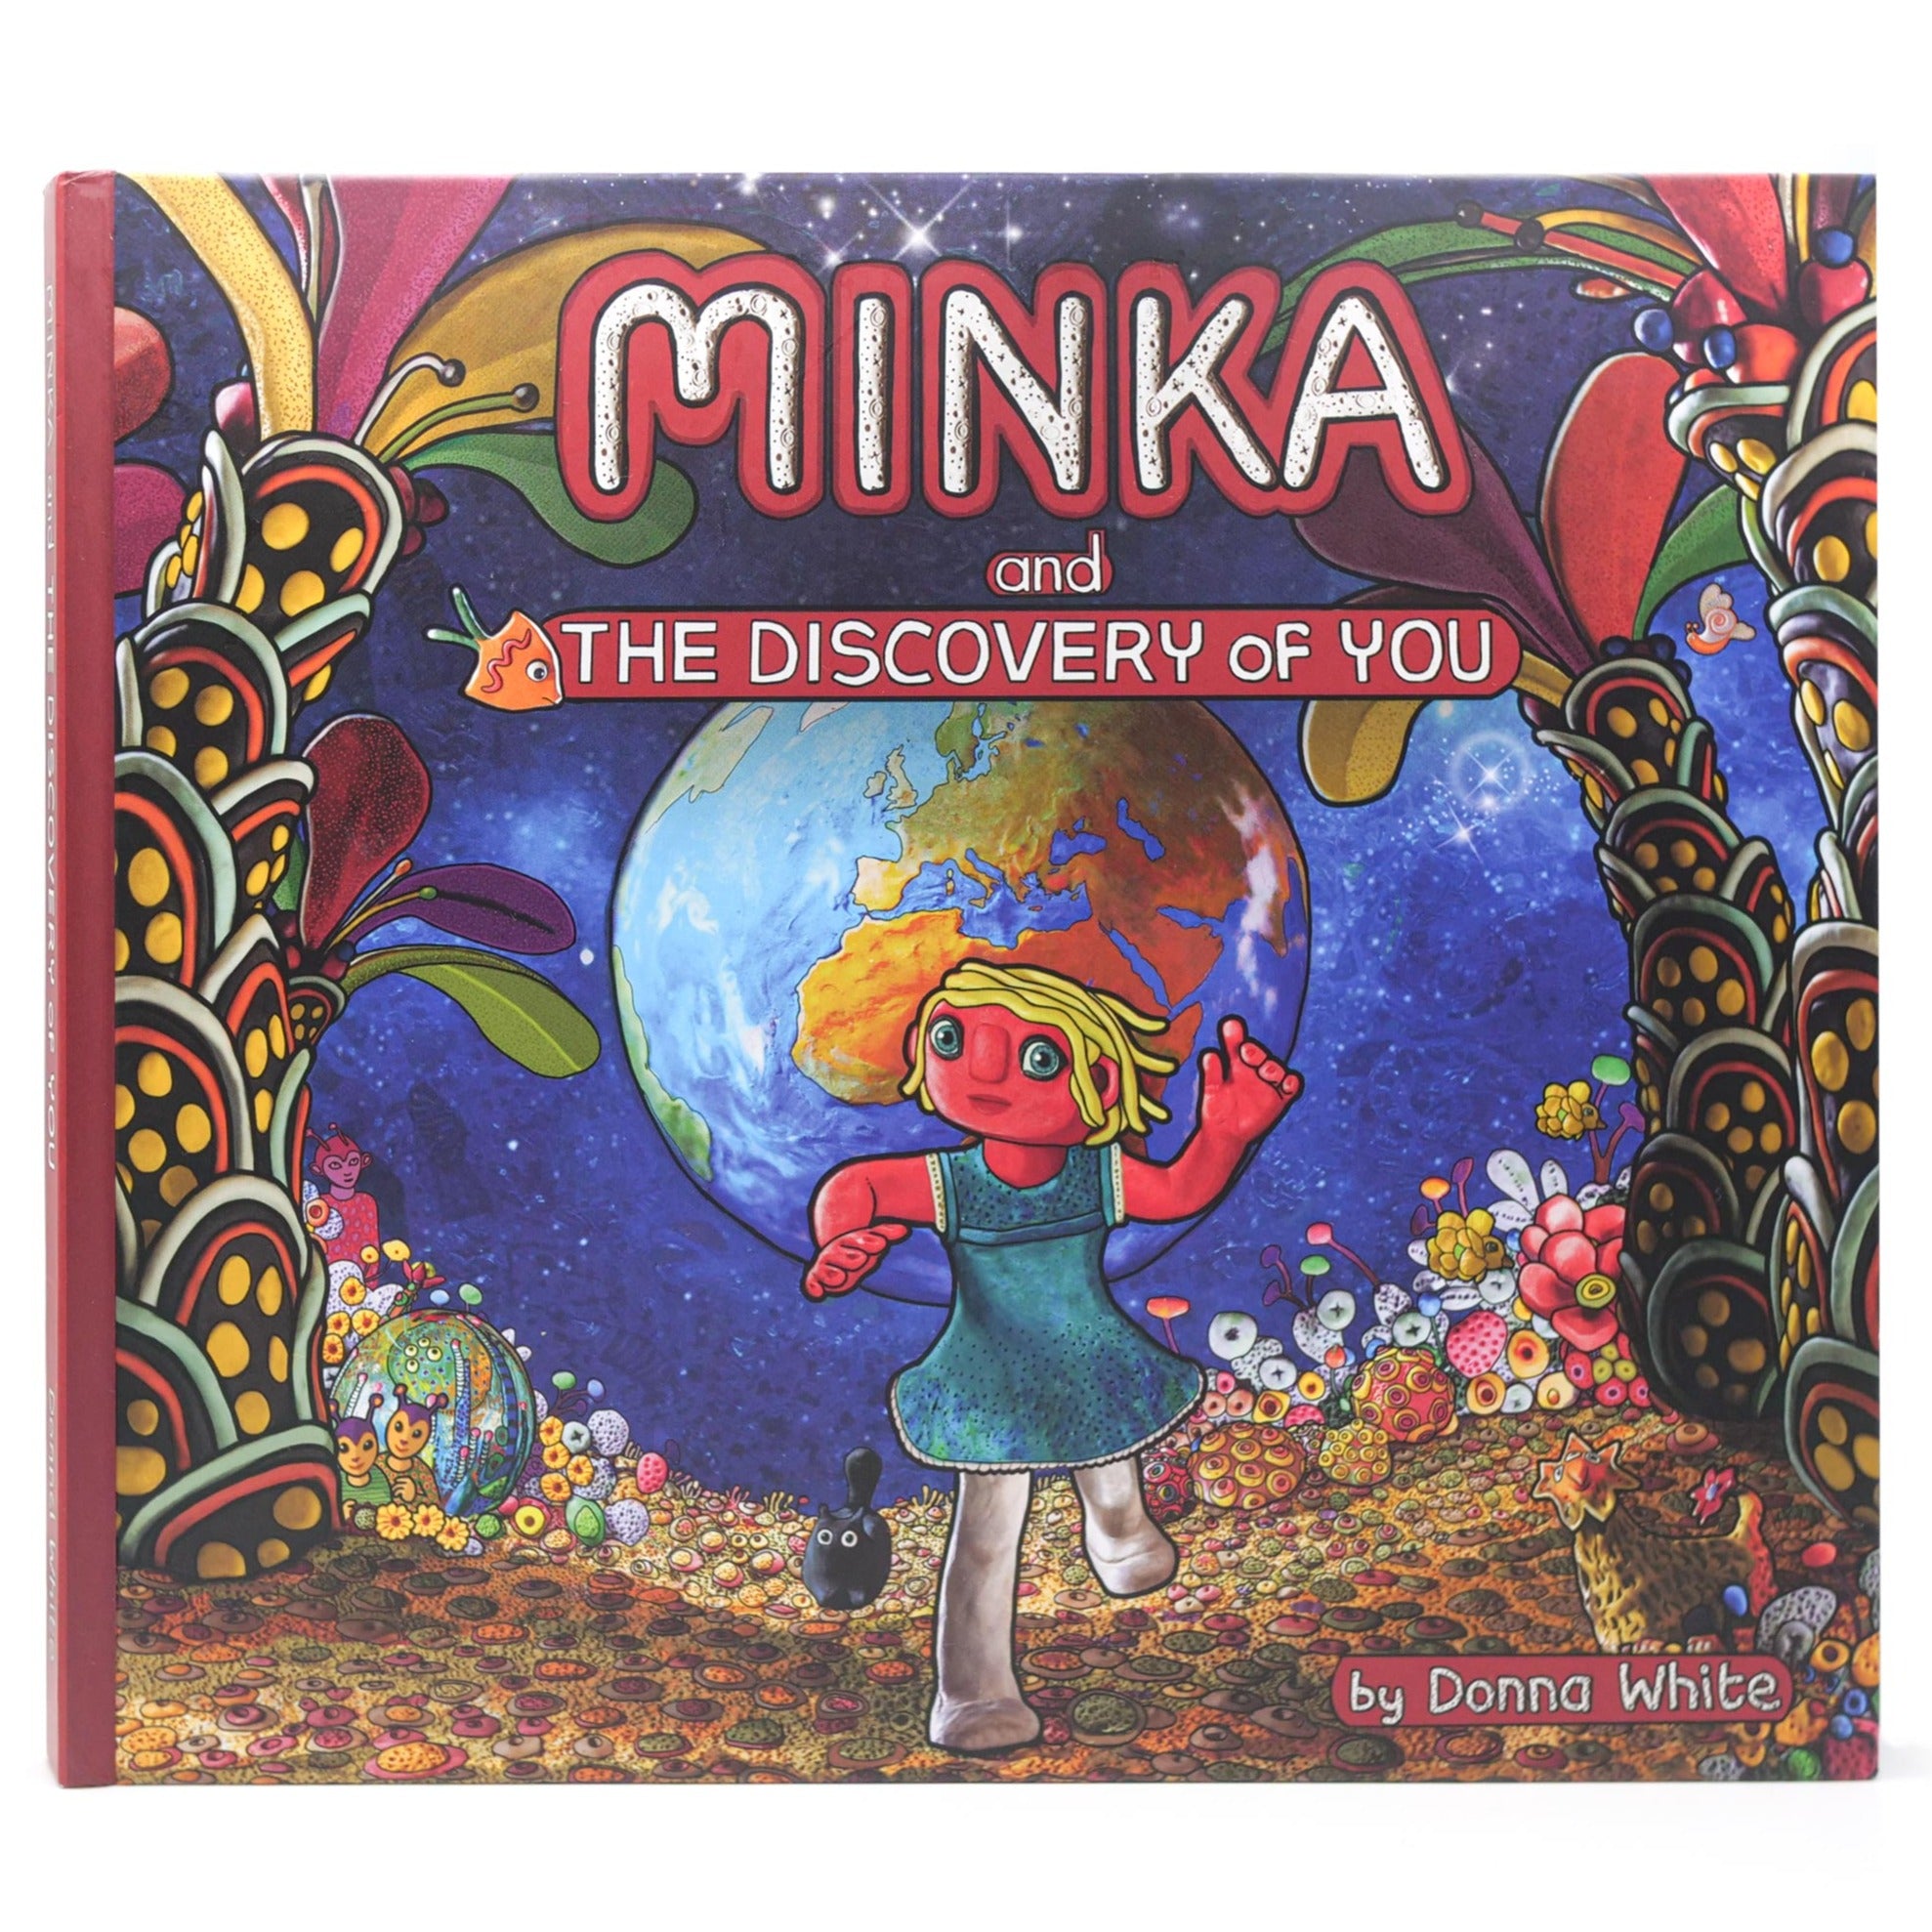 Minka and the Discovery of YOU - Hardcover Signed First Edition